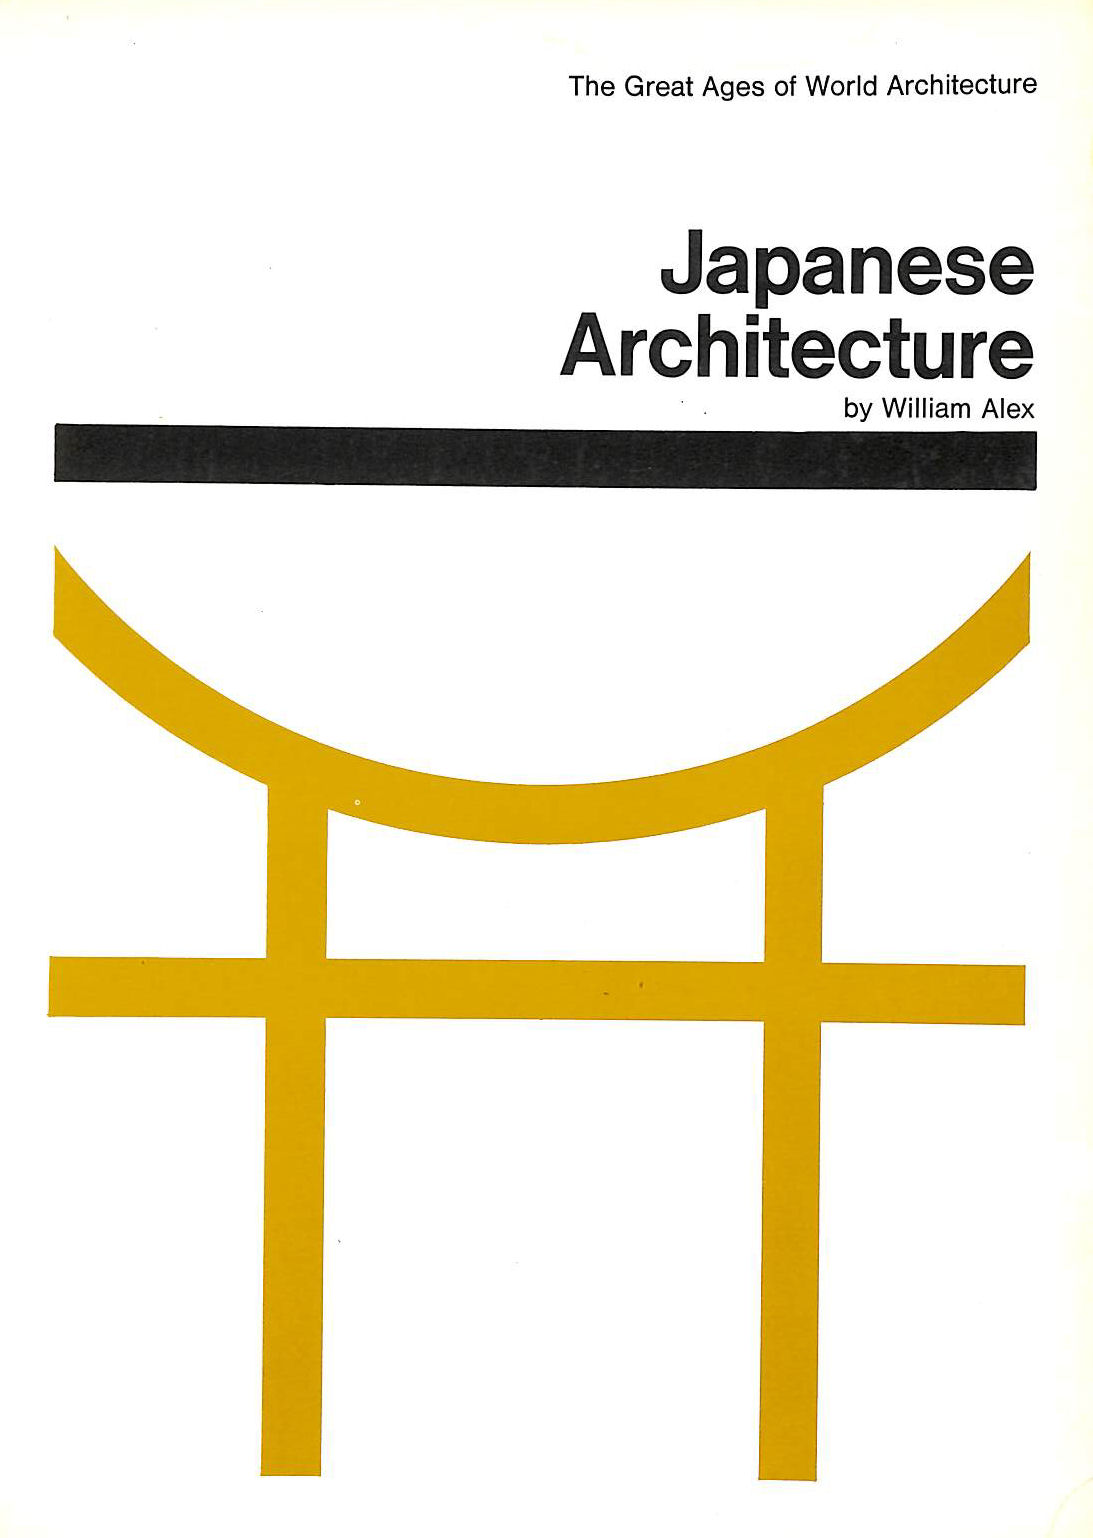 ALEX, WILLIAM - Japanese architecture (Great ages of world architecture)